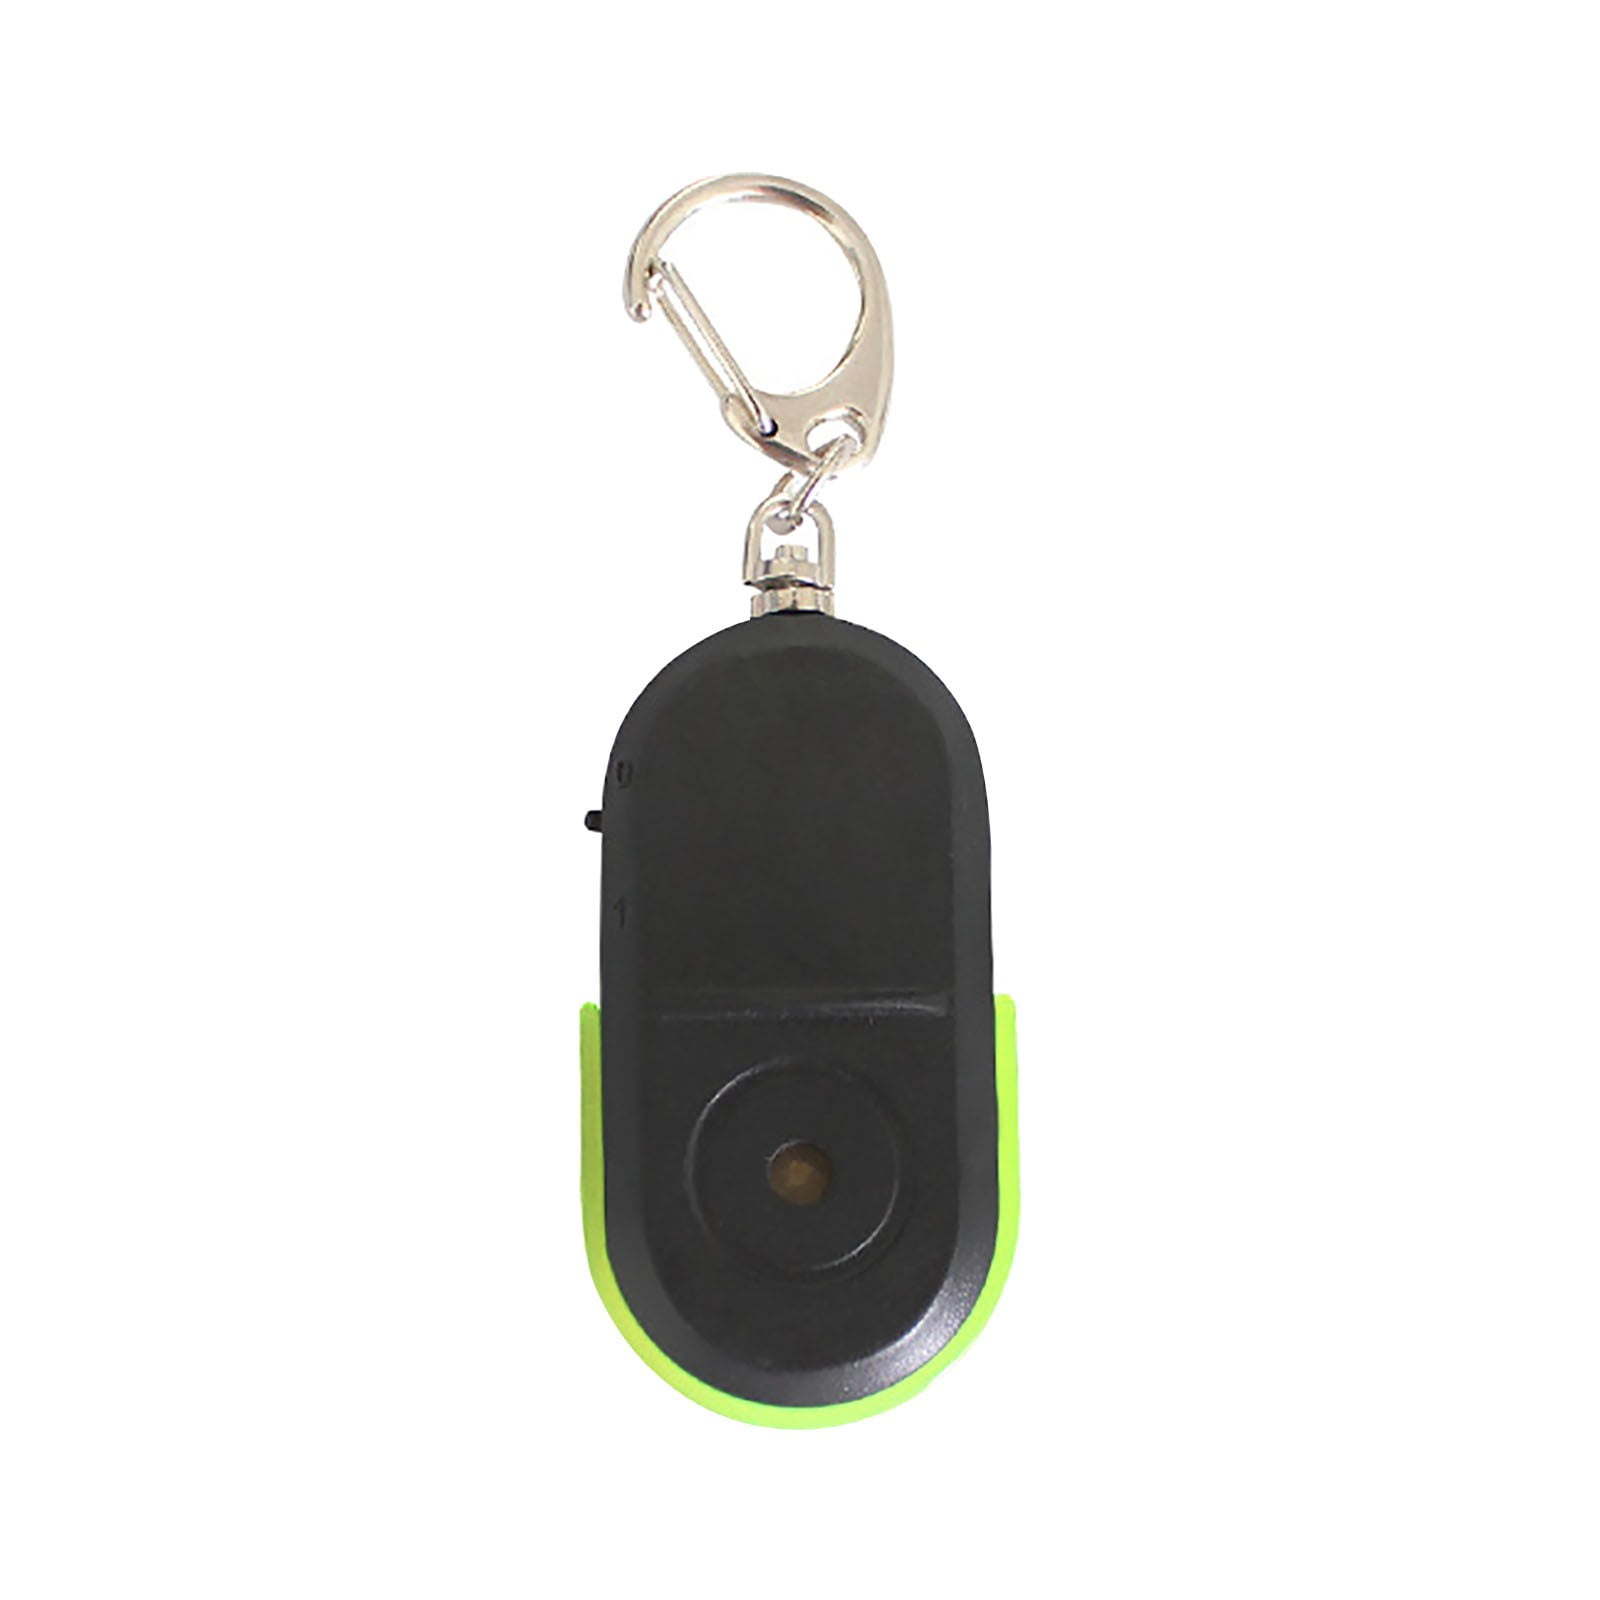 2pk Lost Key Finder Sonic Whistle Flashing Beeping Locator Remote chain LED UK 